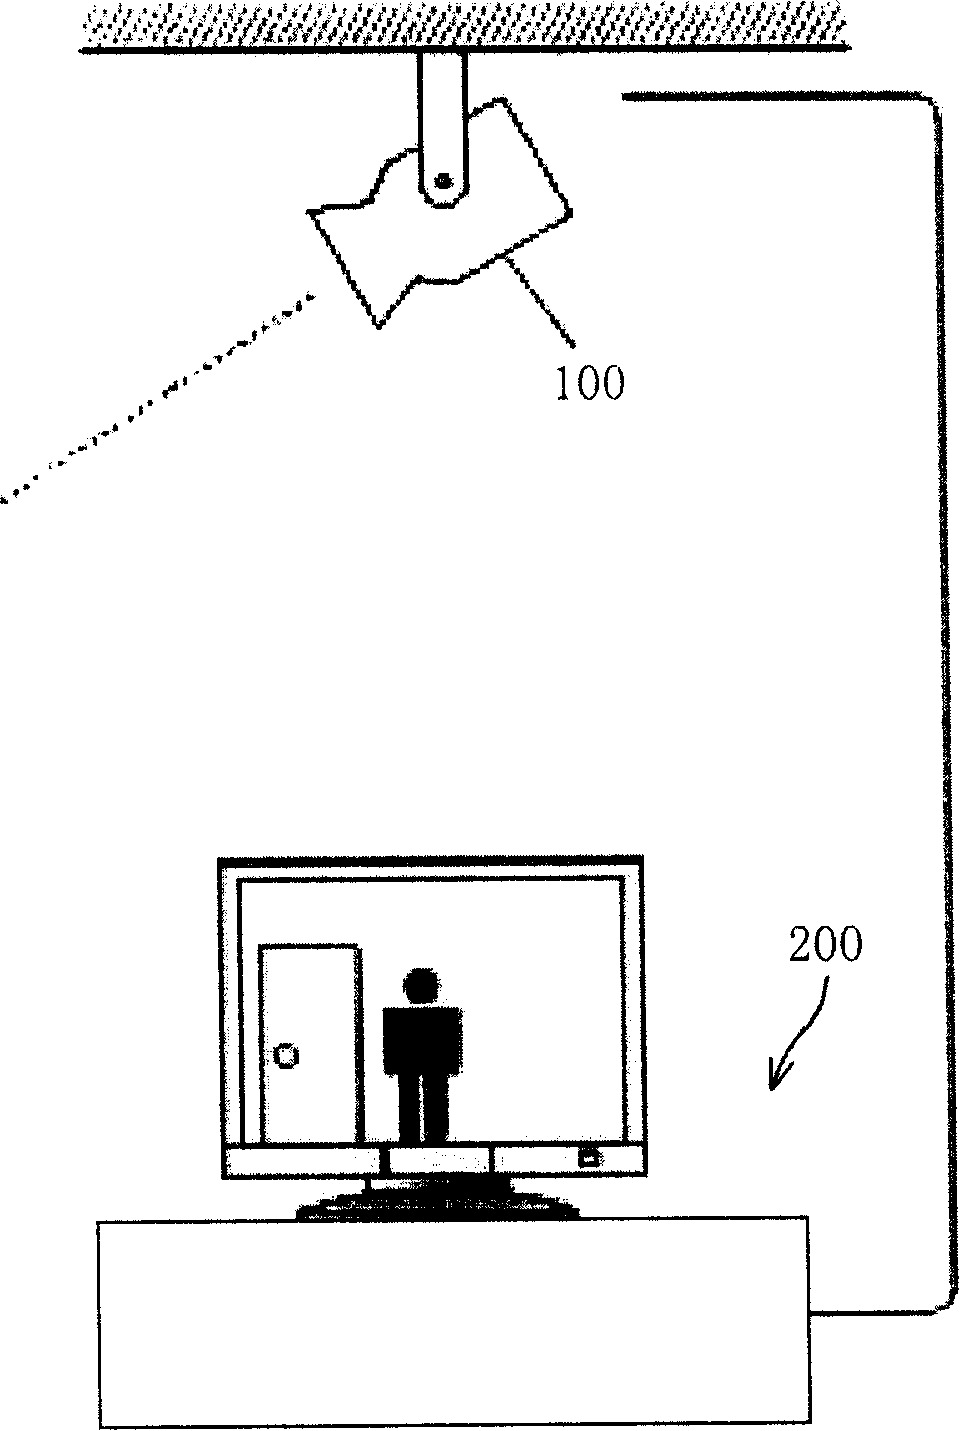 Playing control method for digital video tape recorder